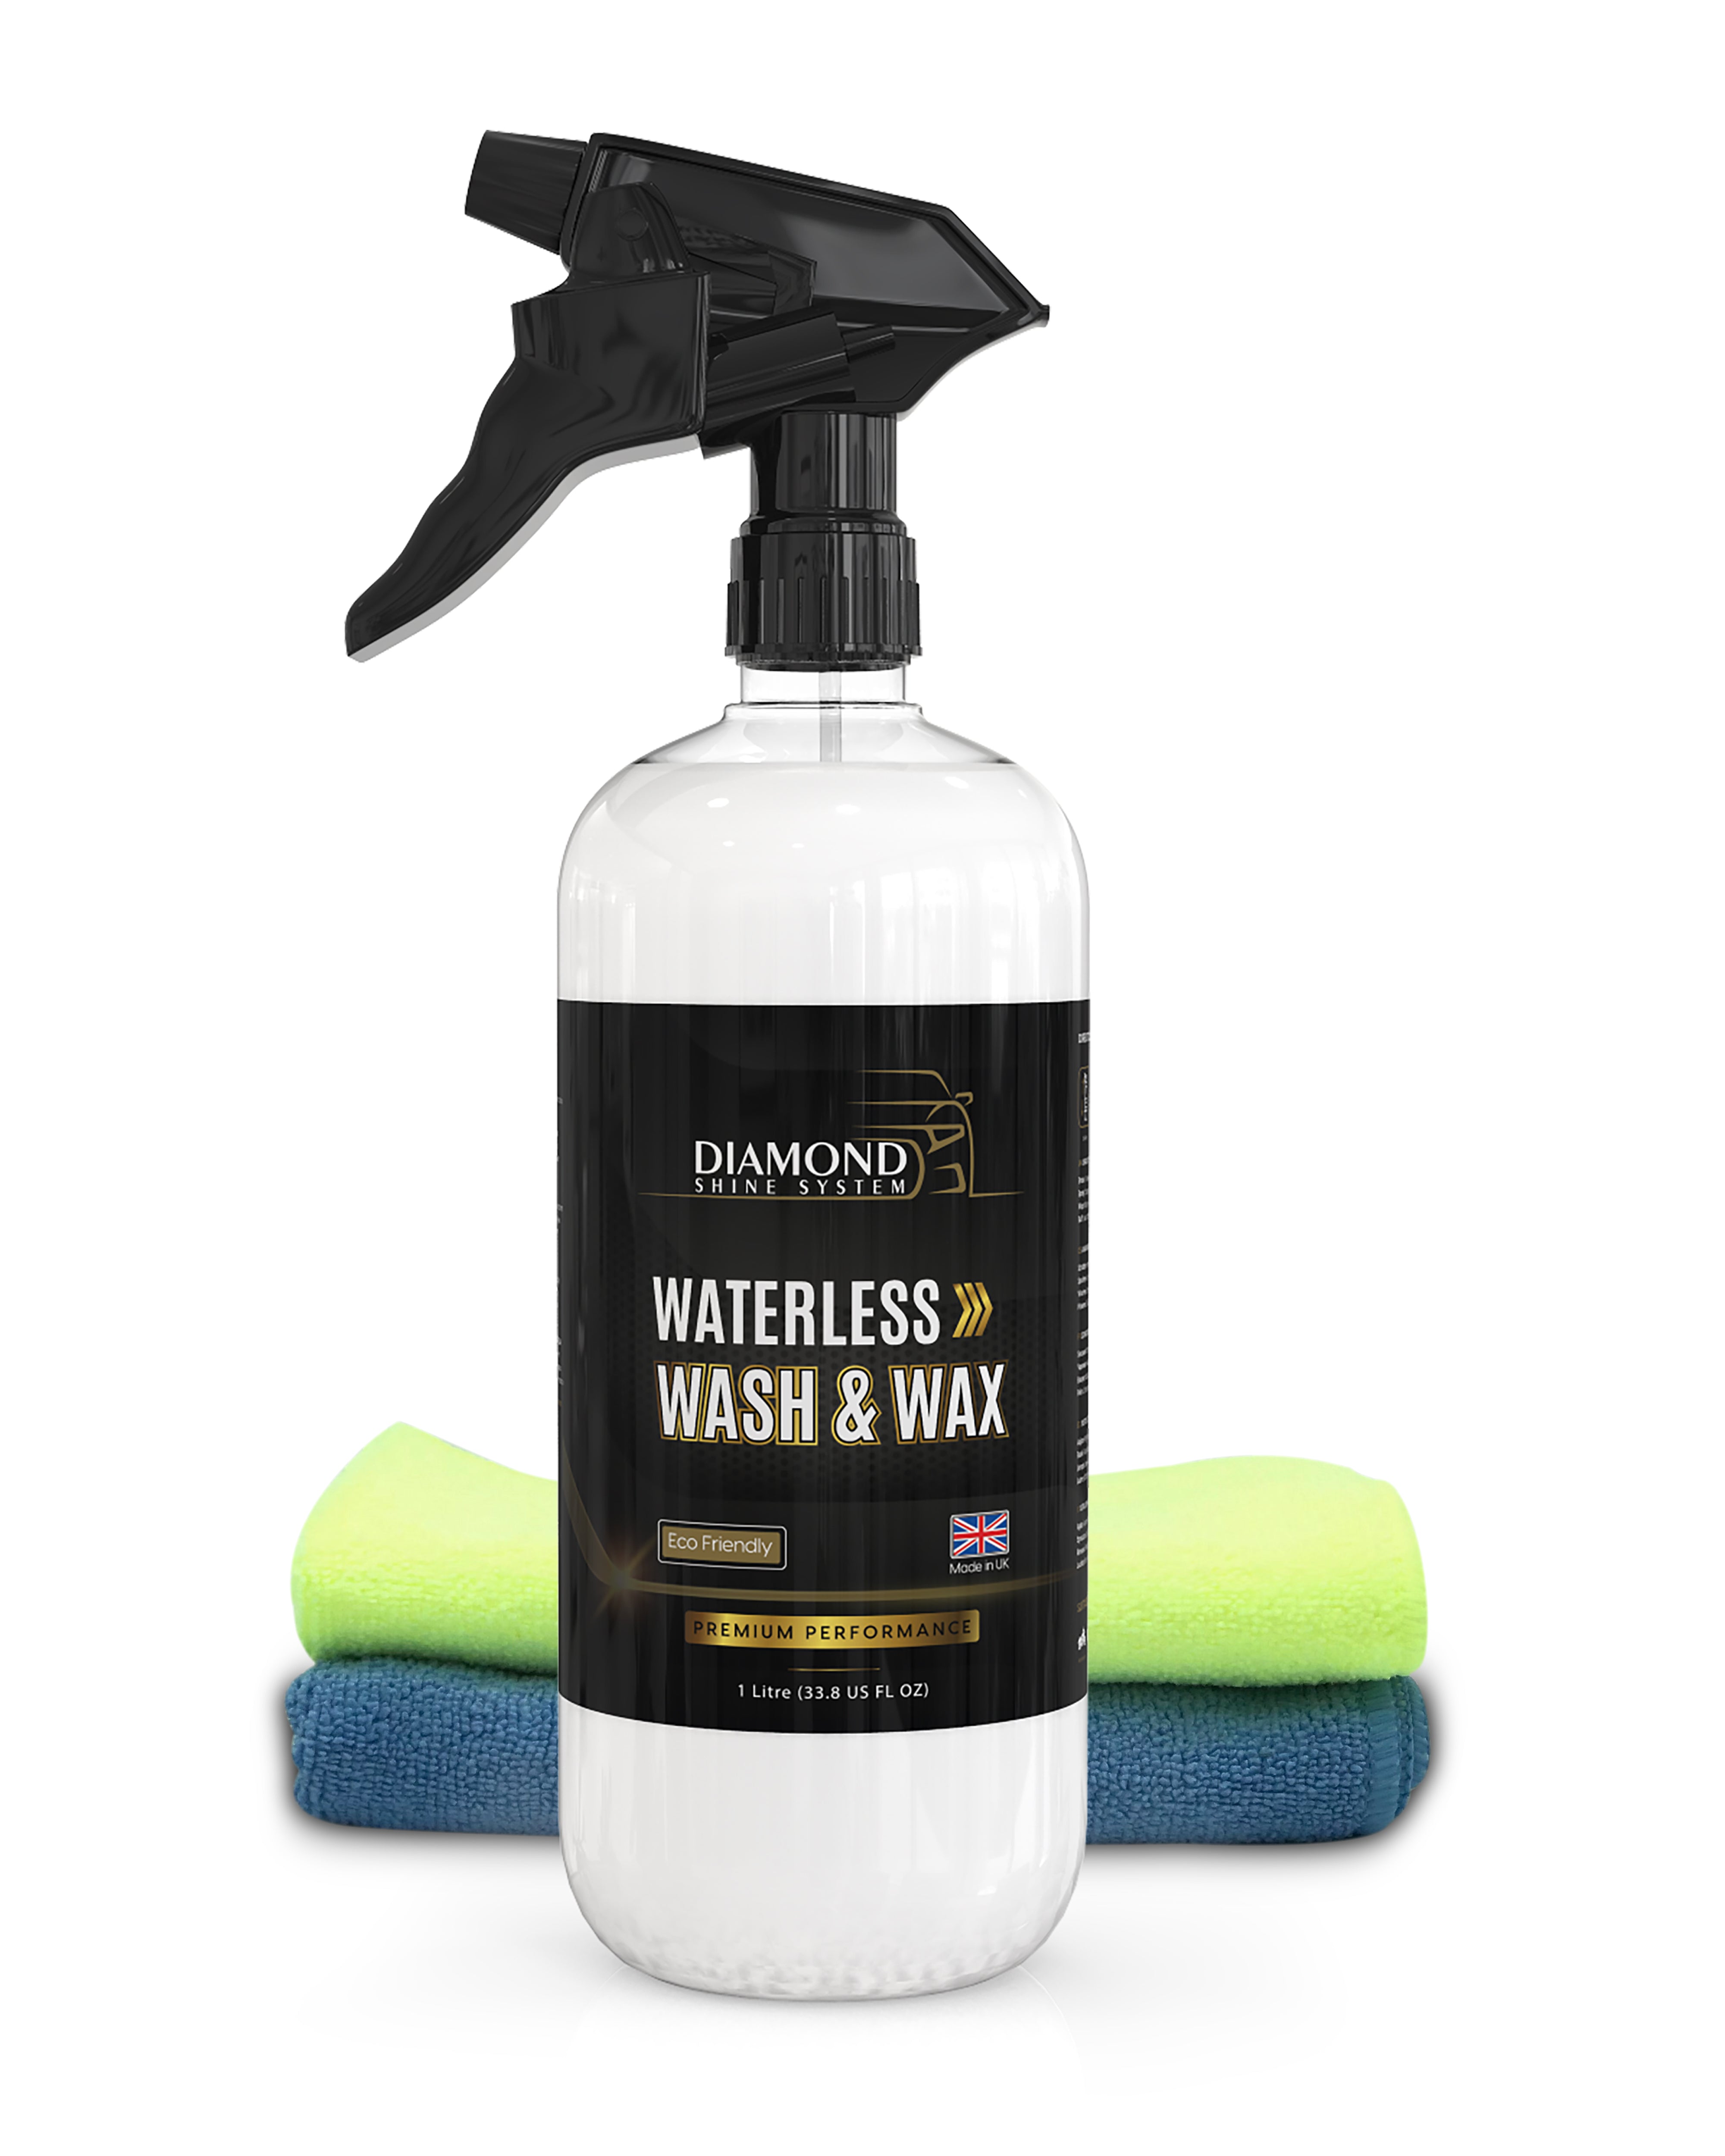 Waterless Wash & Wax Hydrophobic Spray - 1 Litre with 2 Microfibres